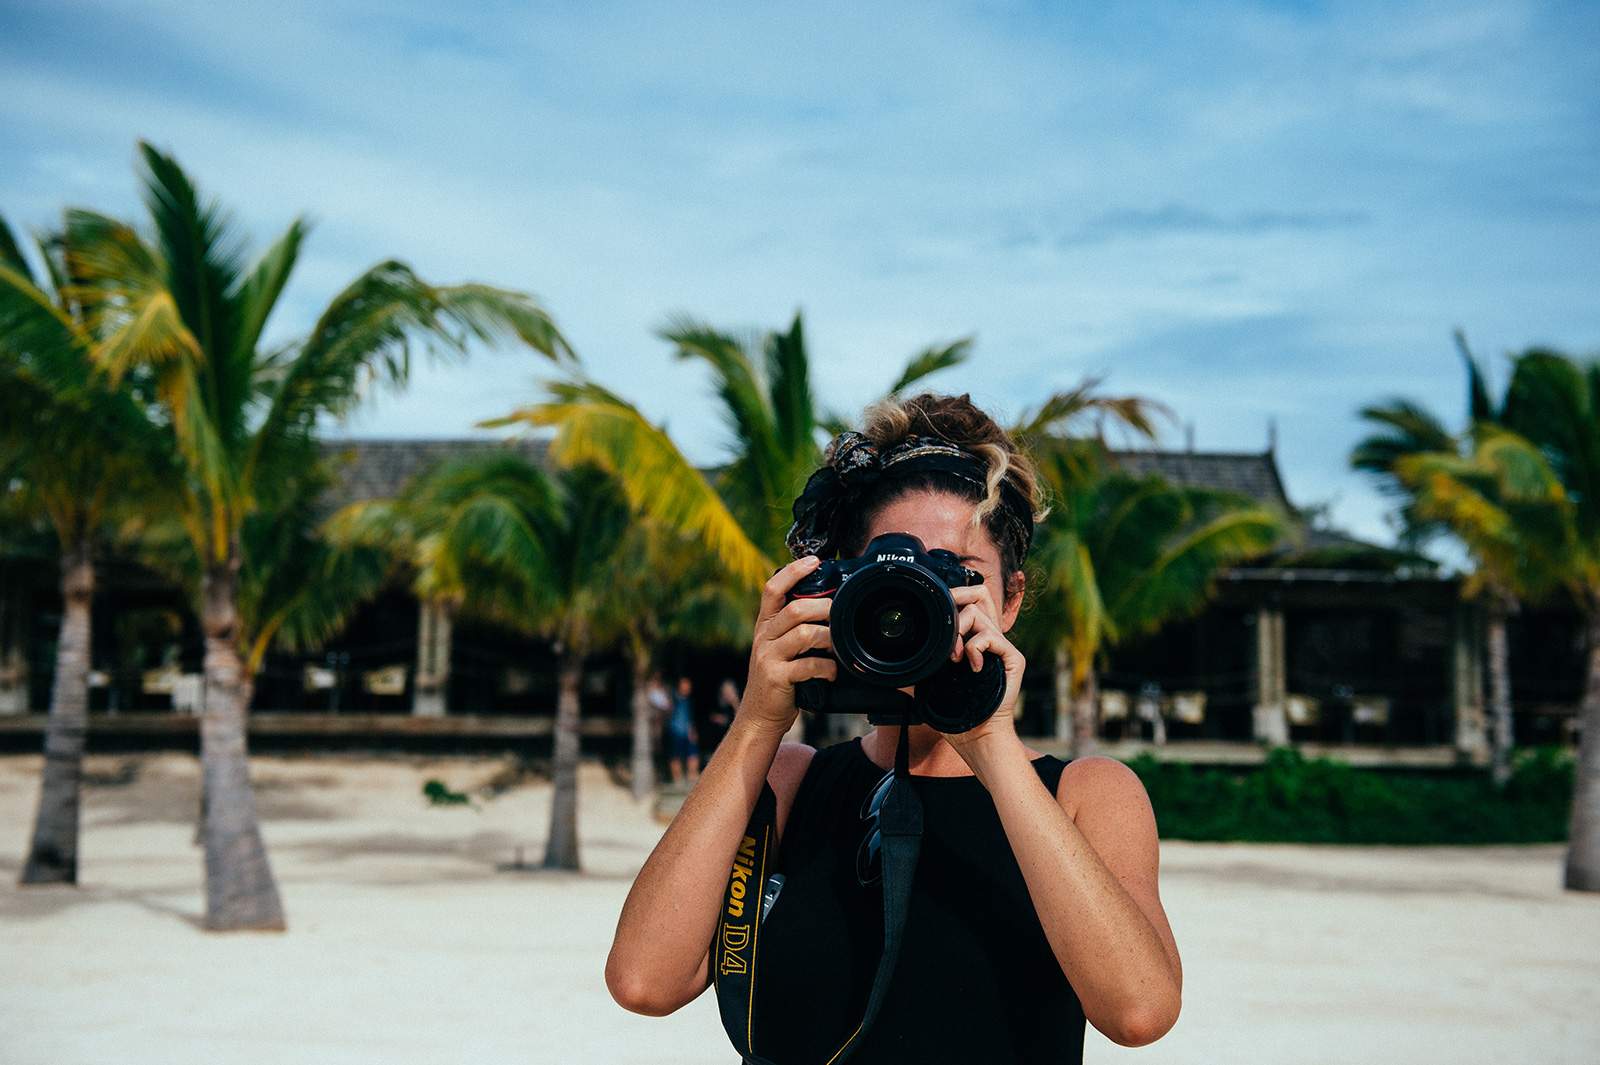 Photographer on location in Mauritius